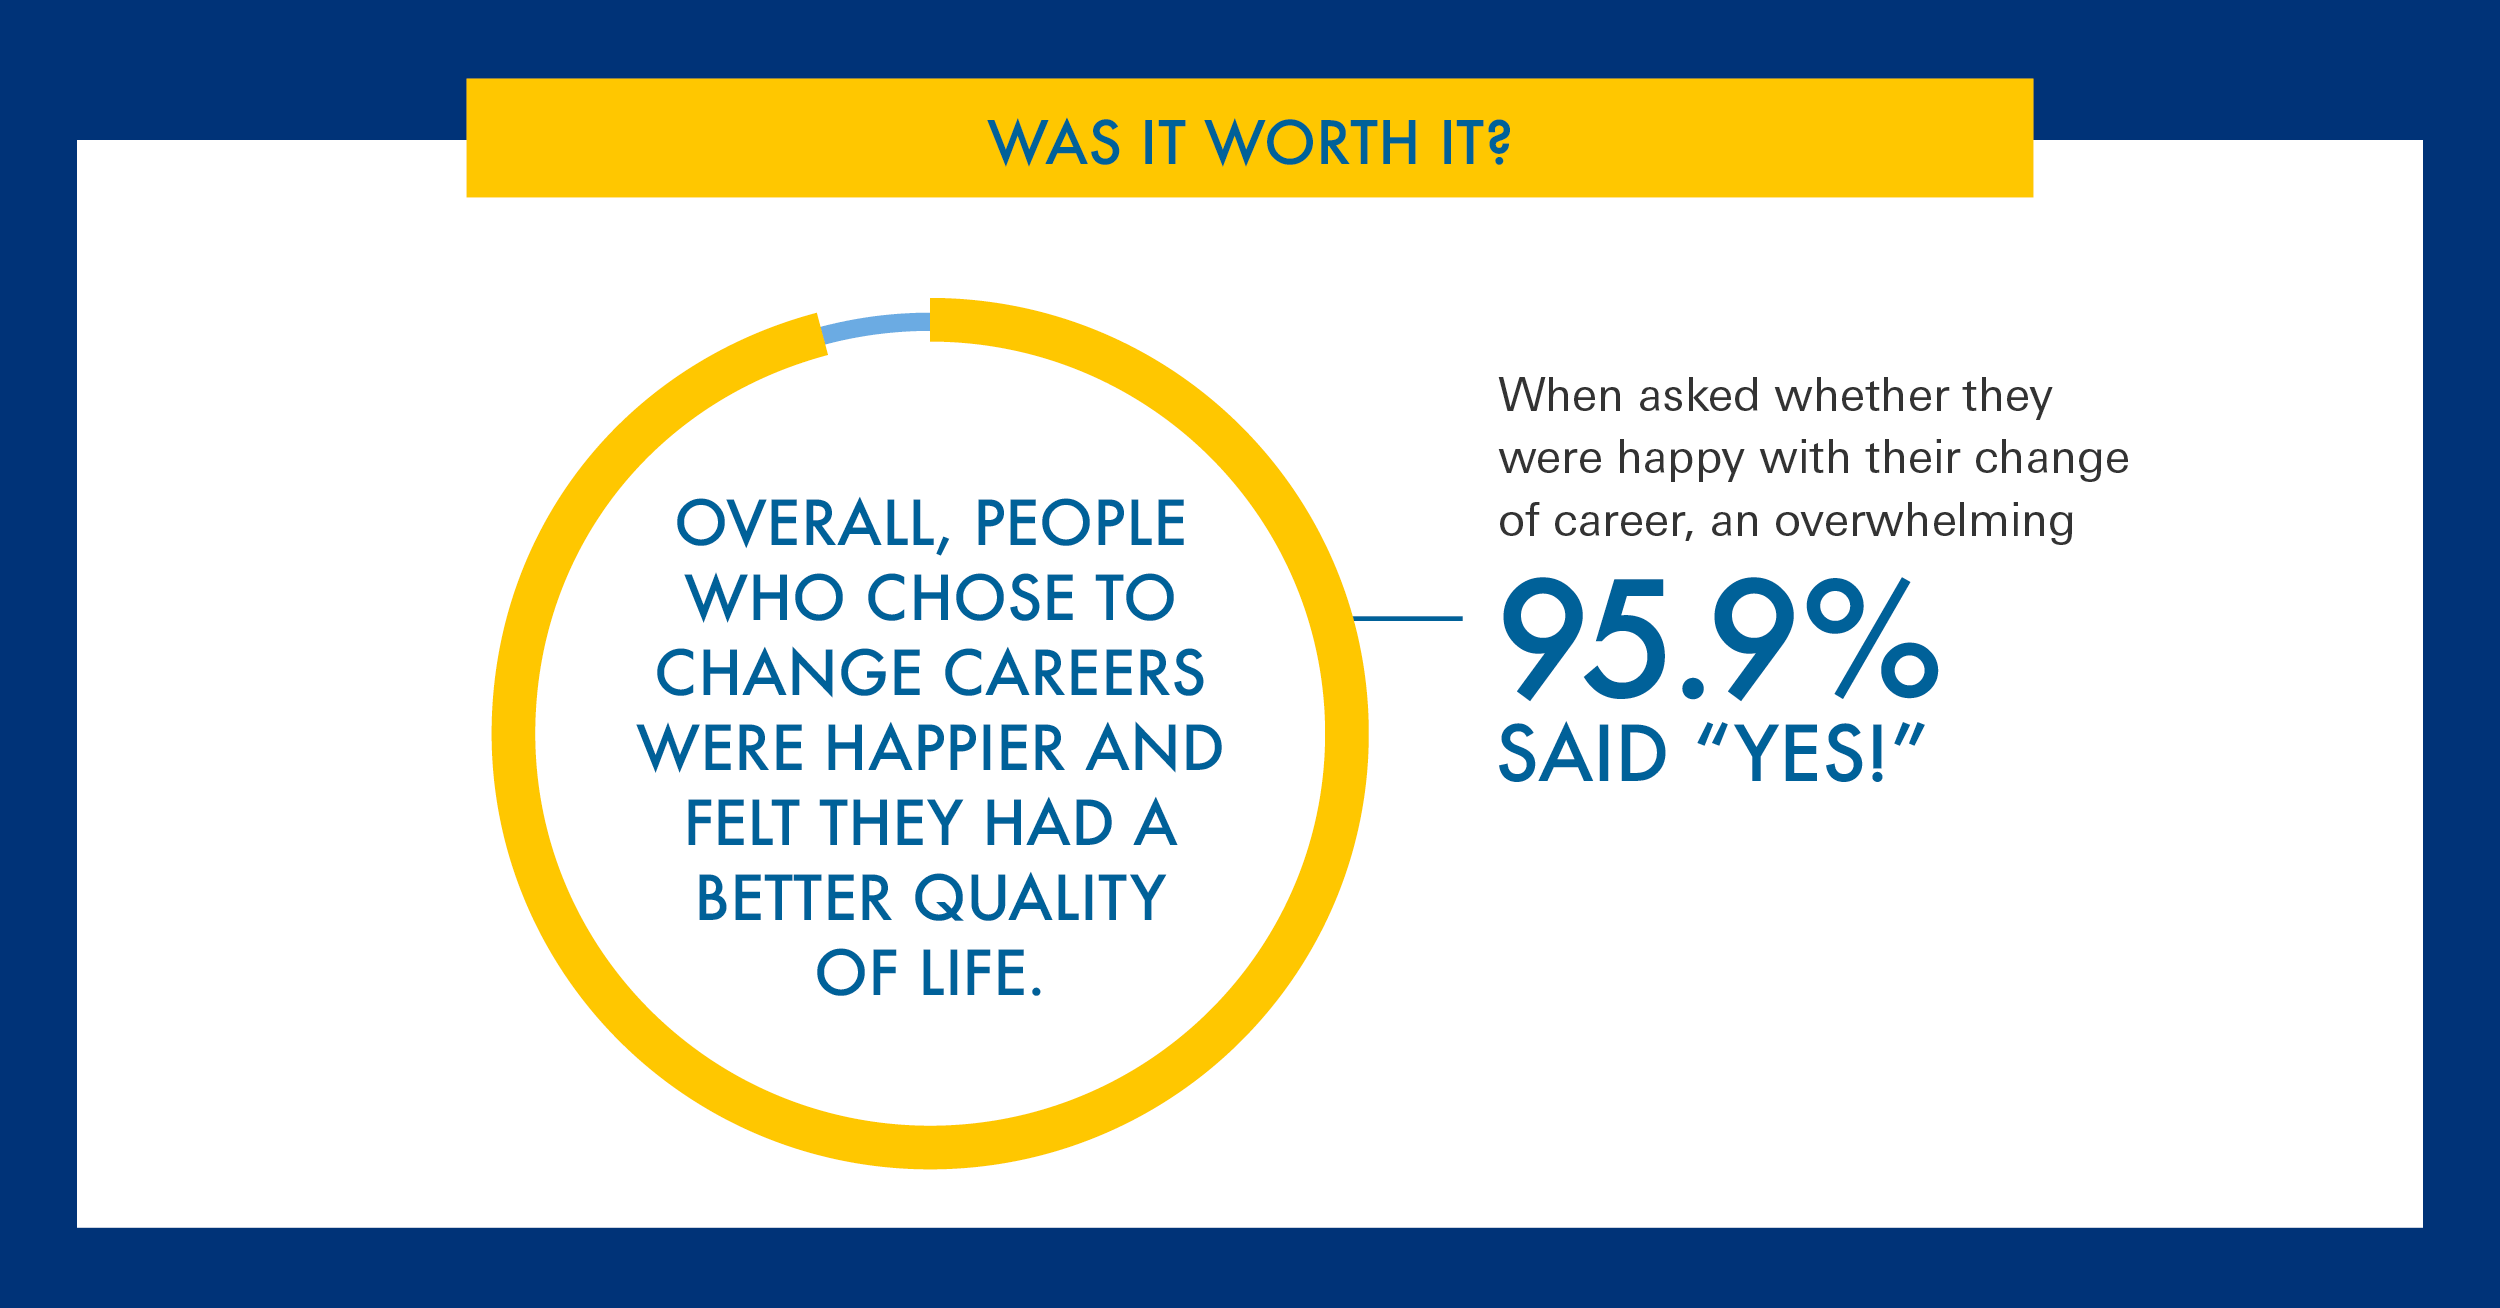 Was a career change worth it – 95.9% said yes